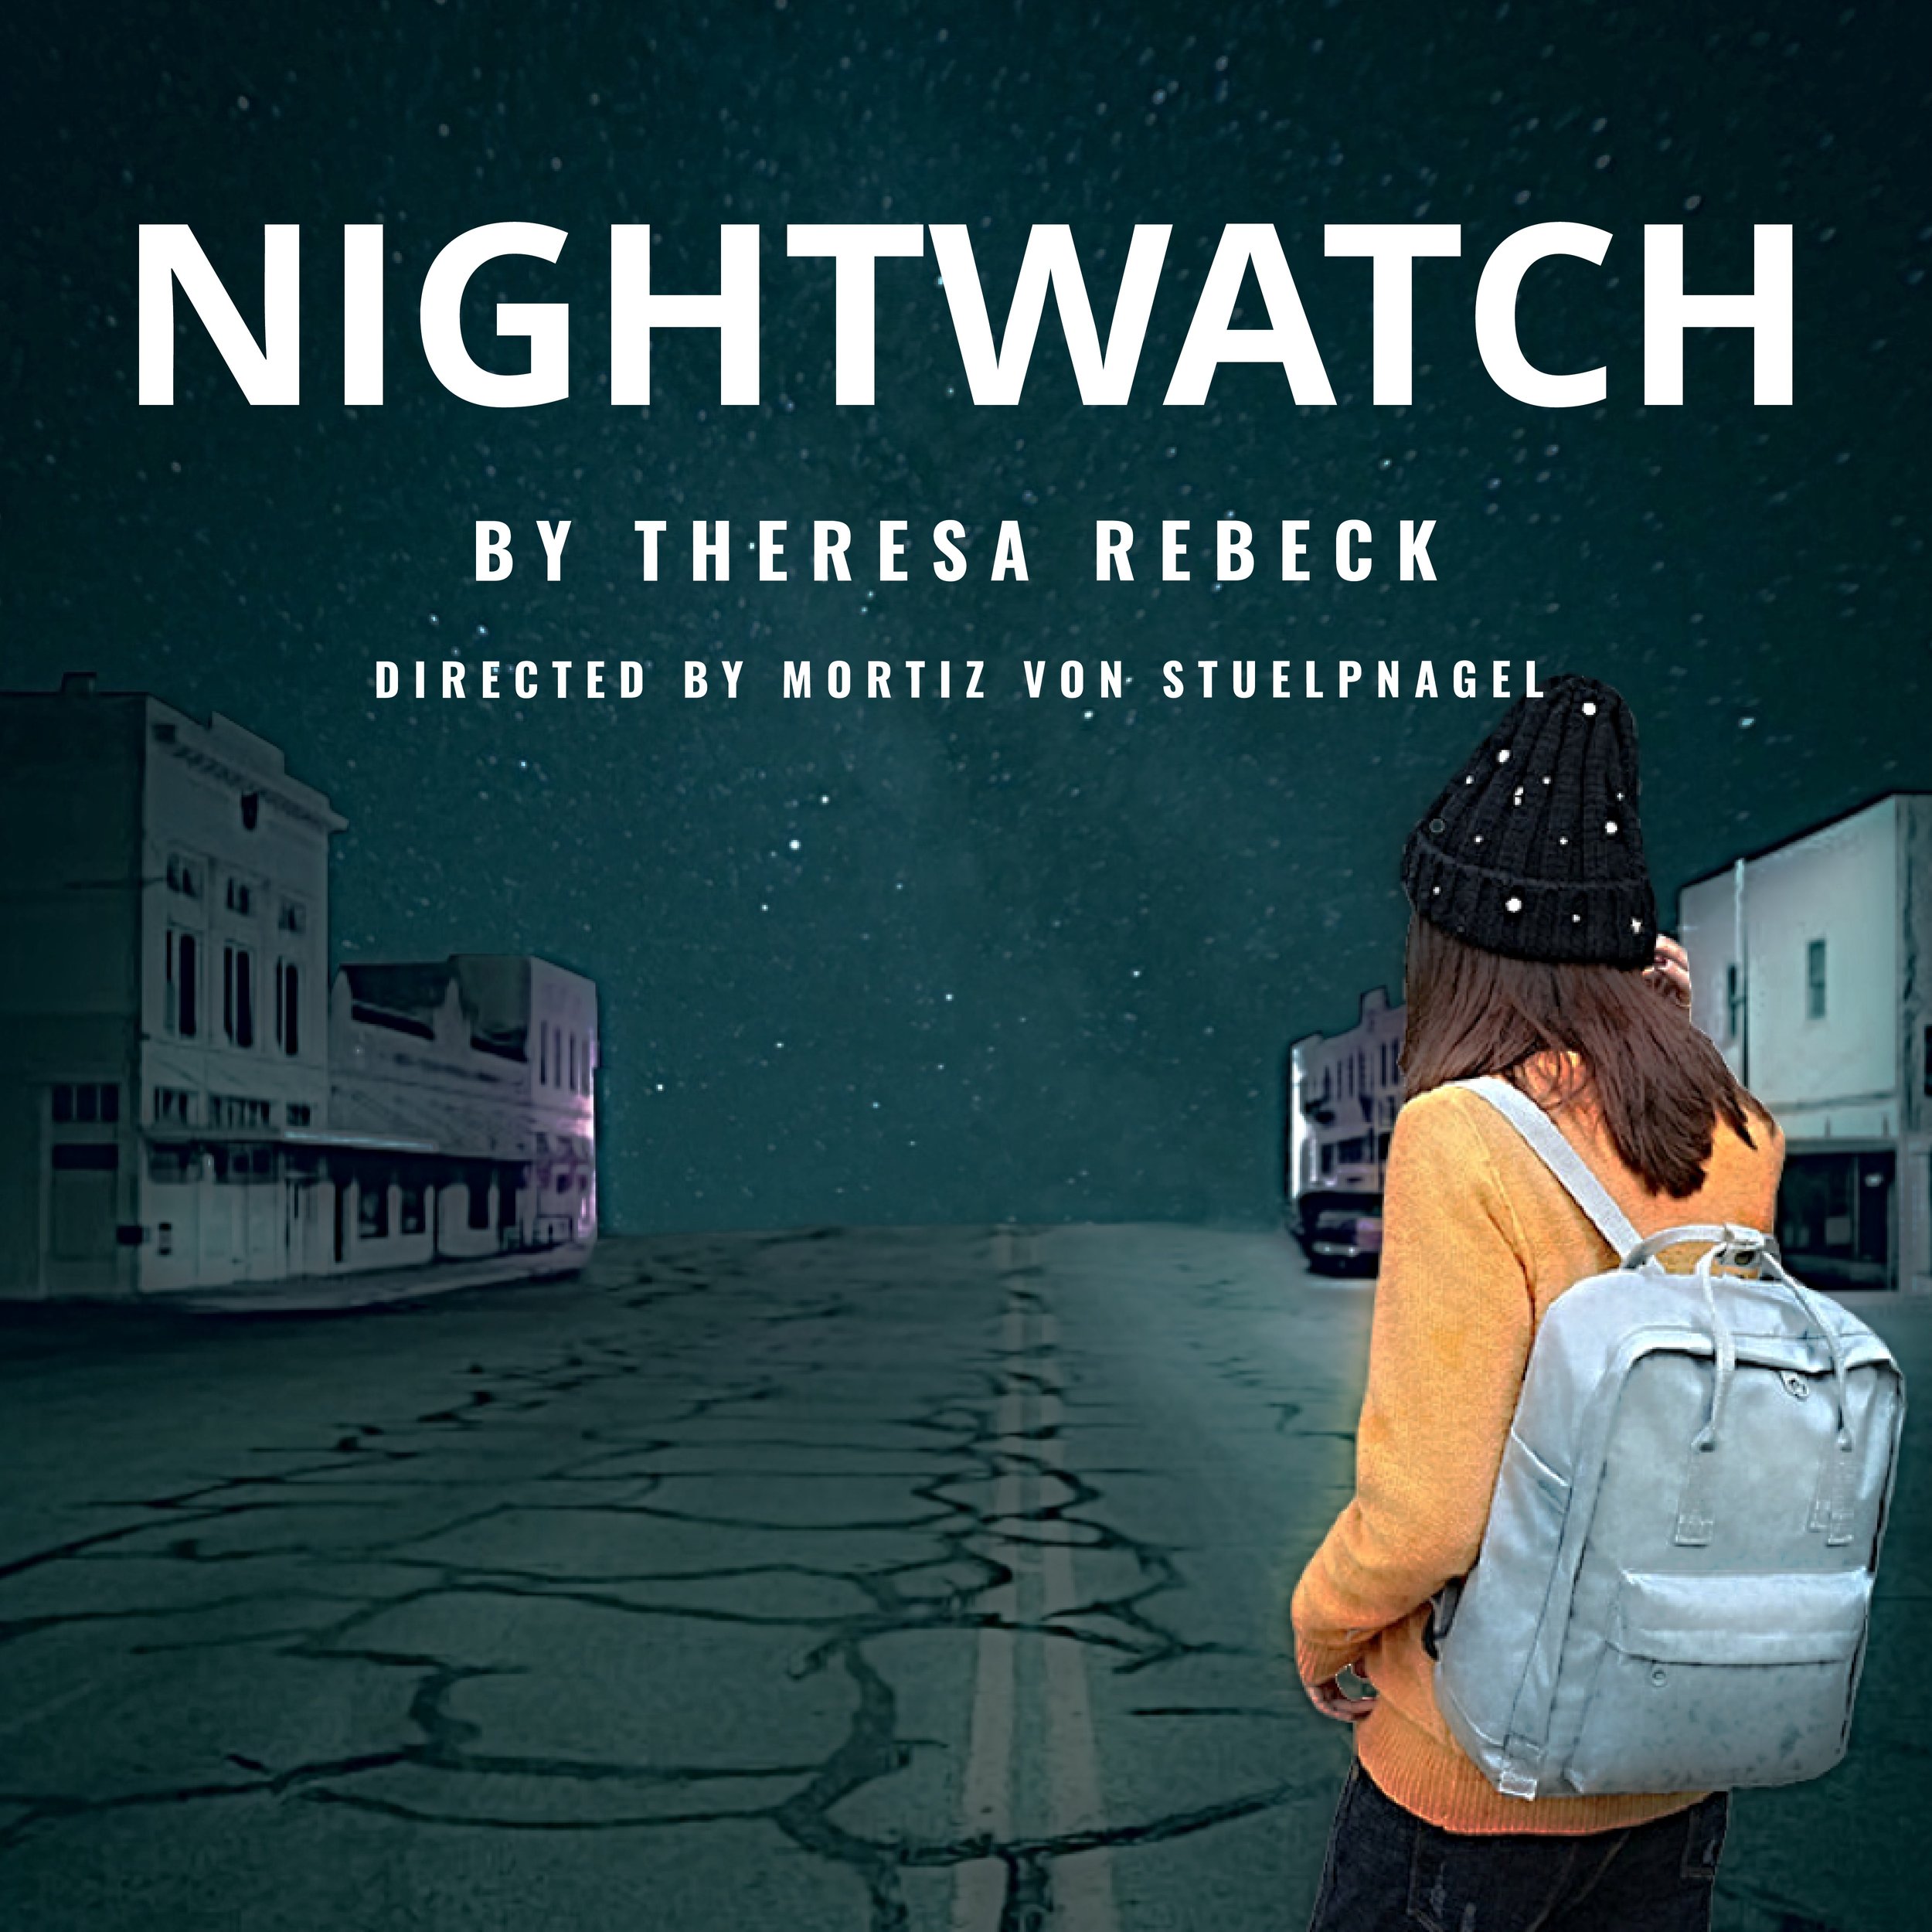 Song List - Nightwatch Productions